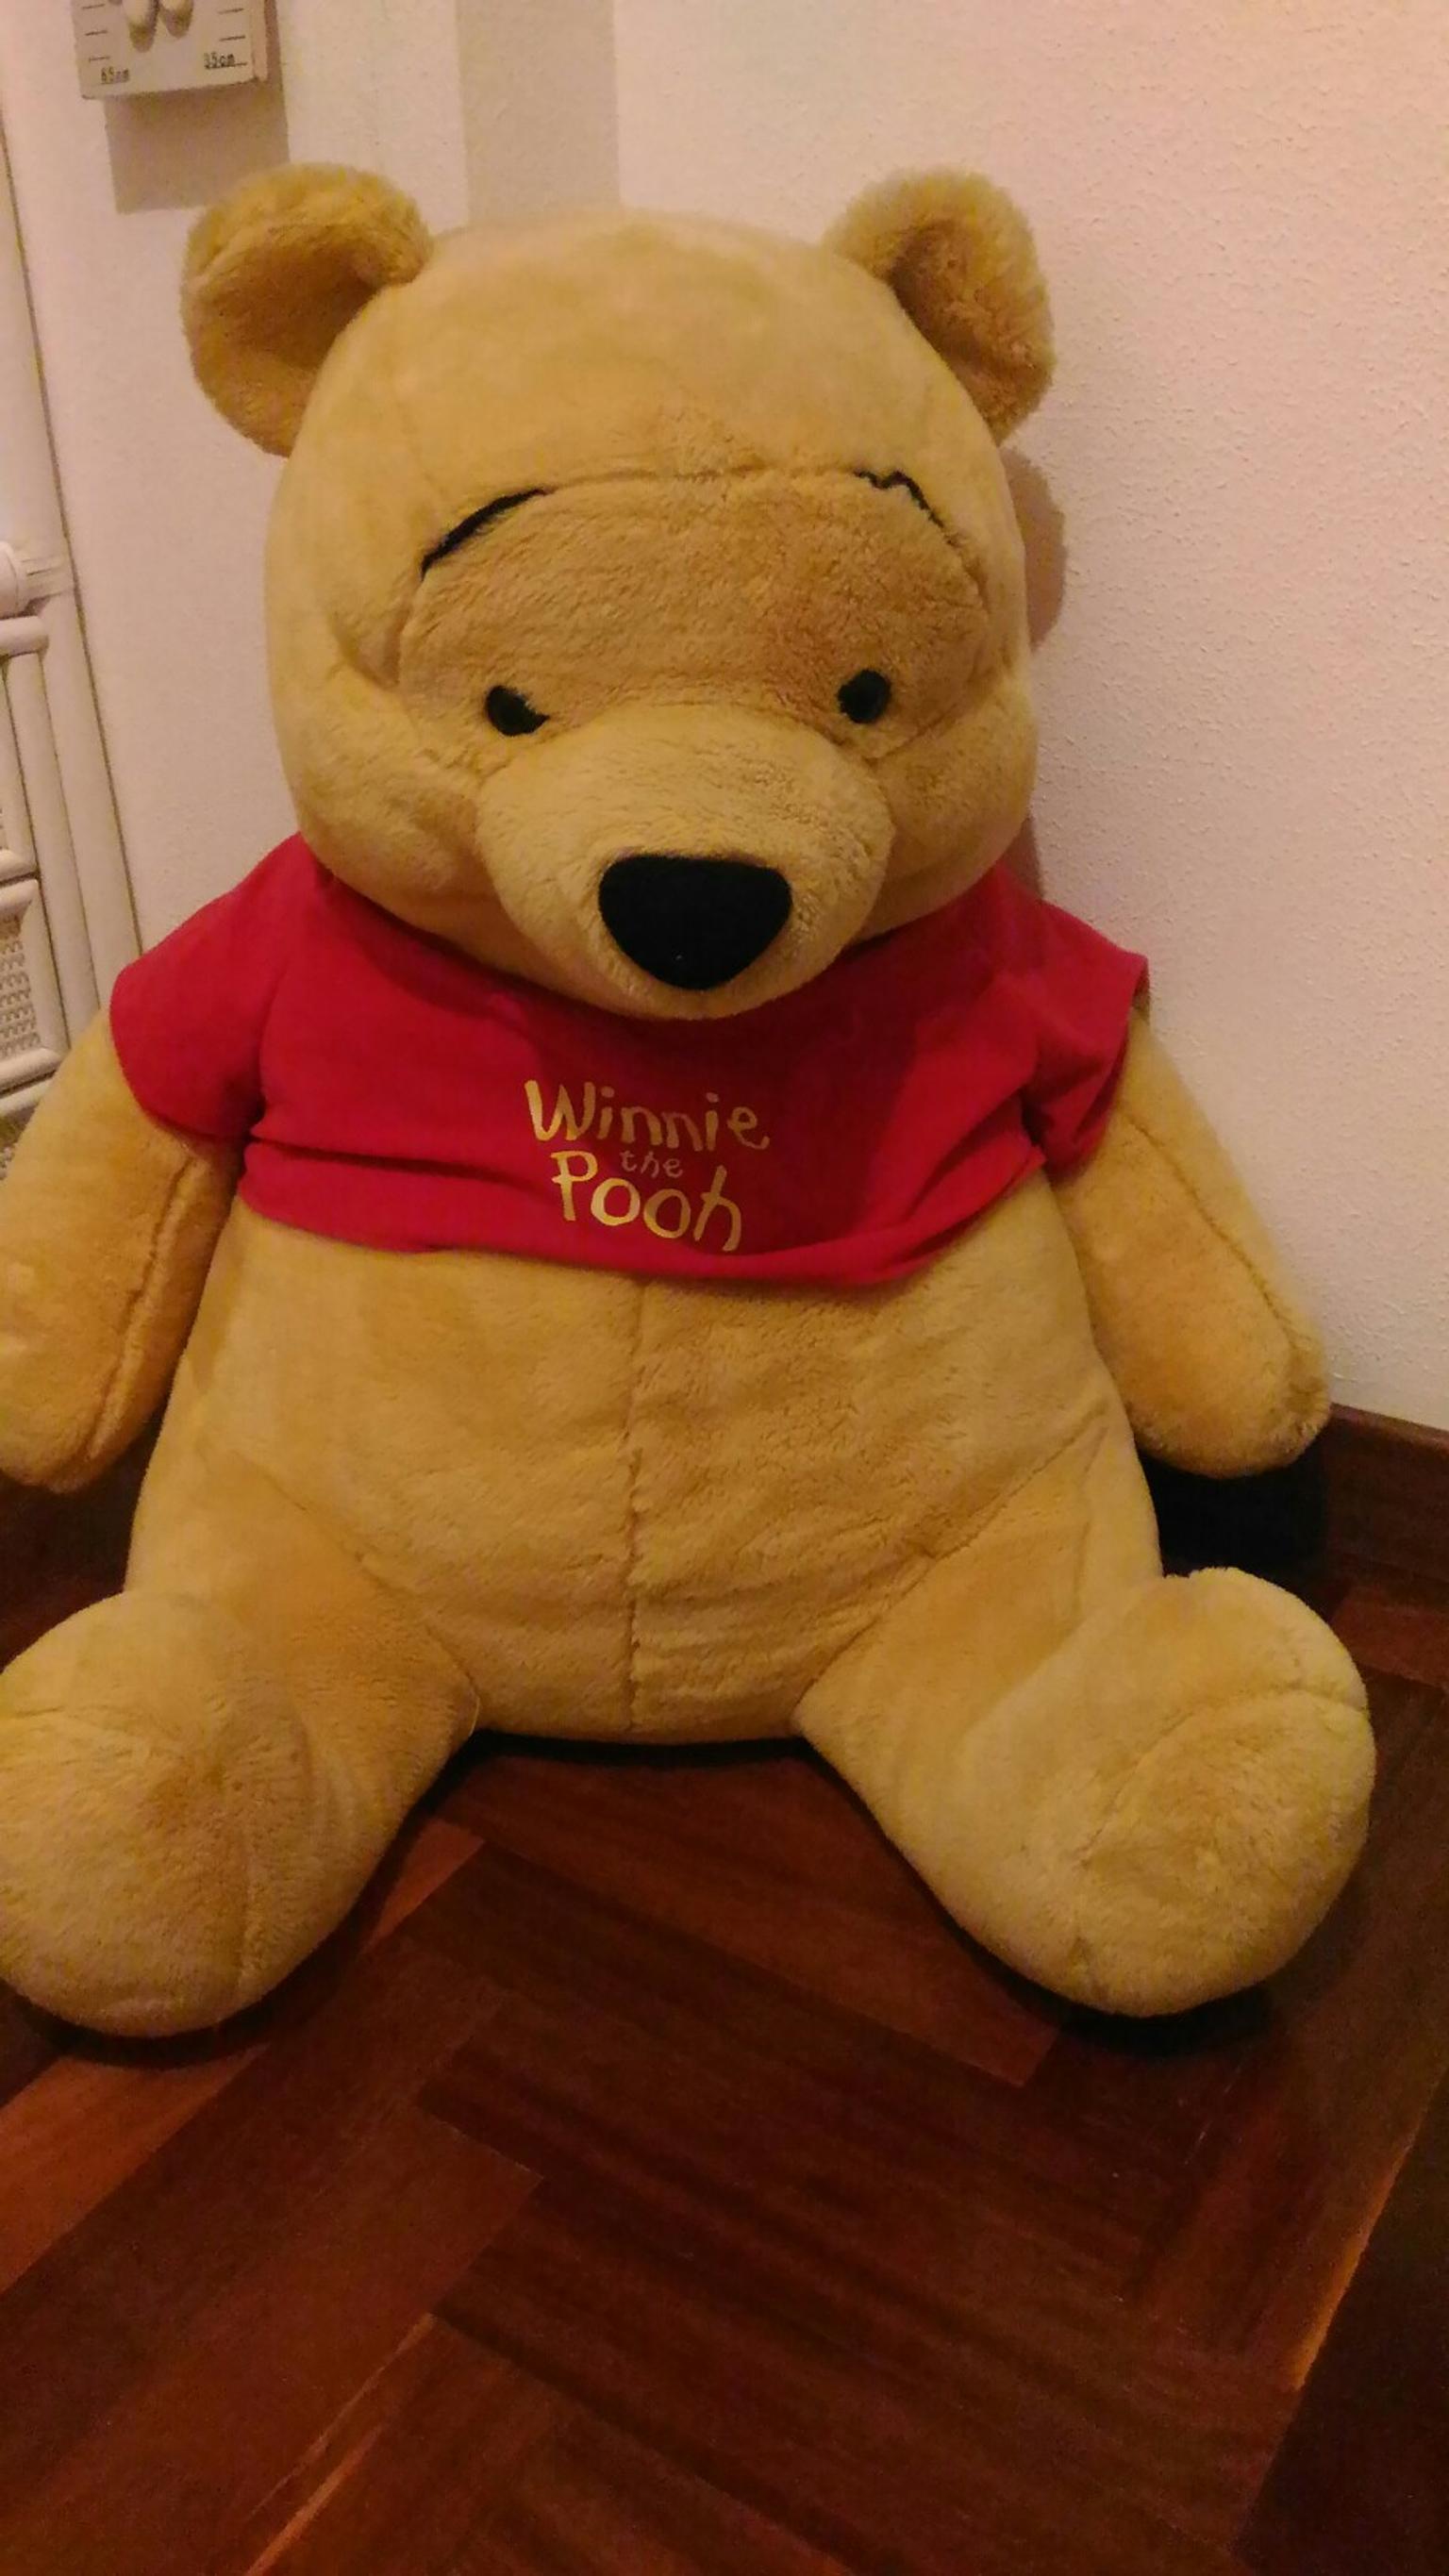 Peluche gigante Winnie the Pooh in 00148 Roma for €15.00 for sale 